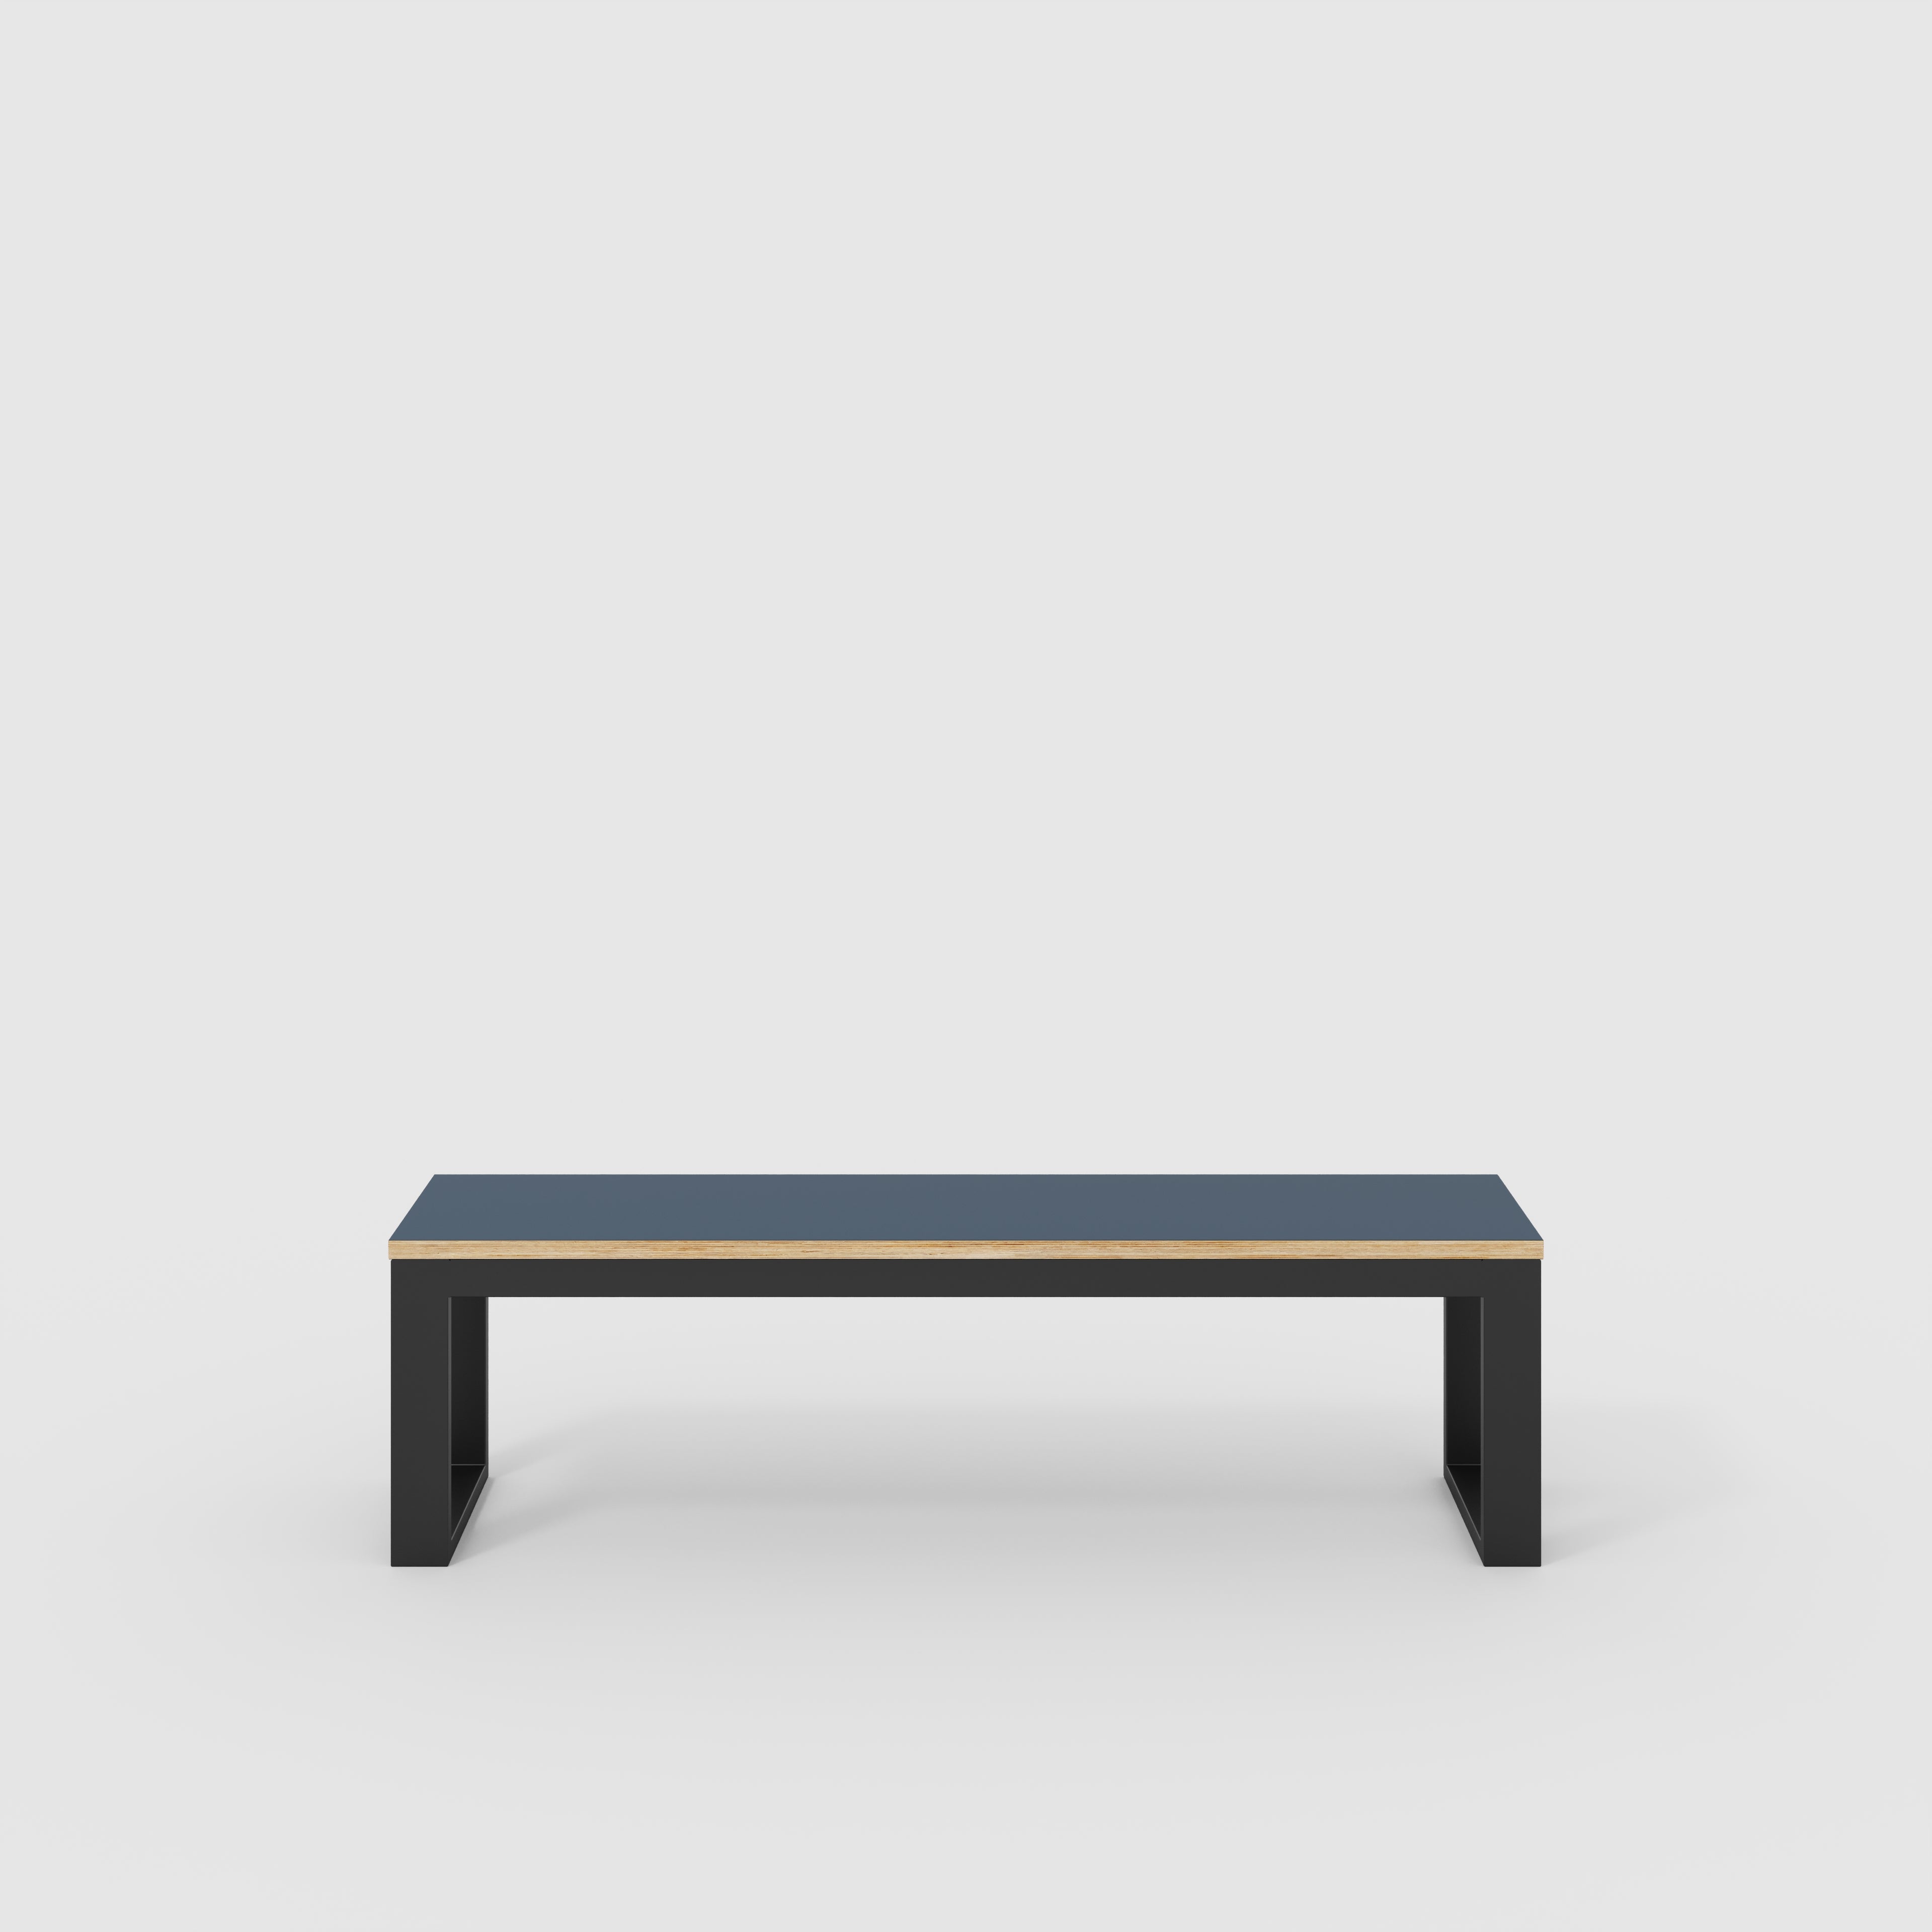 Bench Seat with Black Industrial Frame - Formica Night Sea Blue - 1500(w) x 325(d)